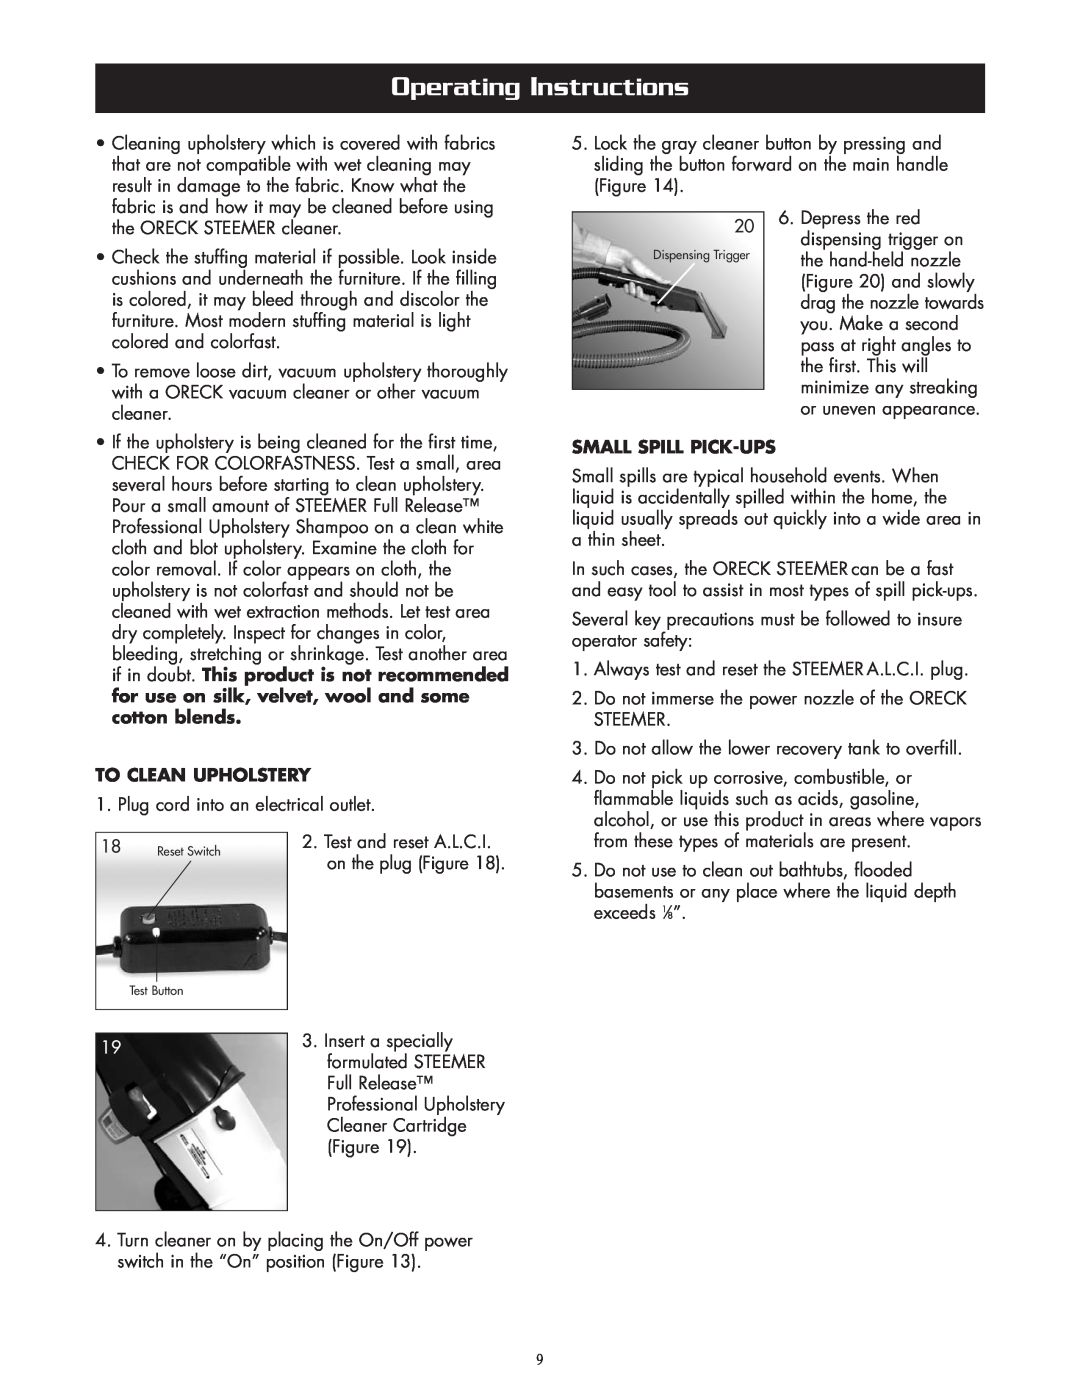 Oreck XLS465 Operating Instructions, if in doubt. This product is not recommended, for use on silk, velvet, wool and some 